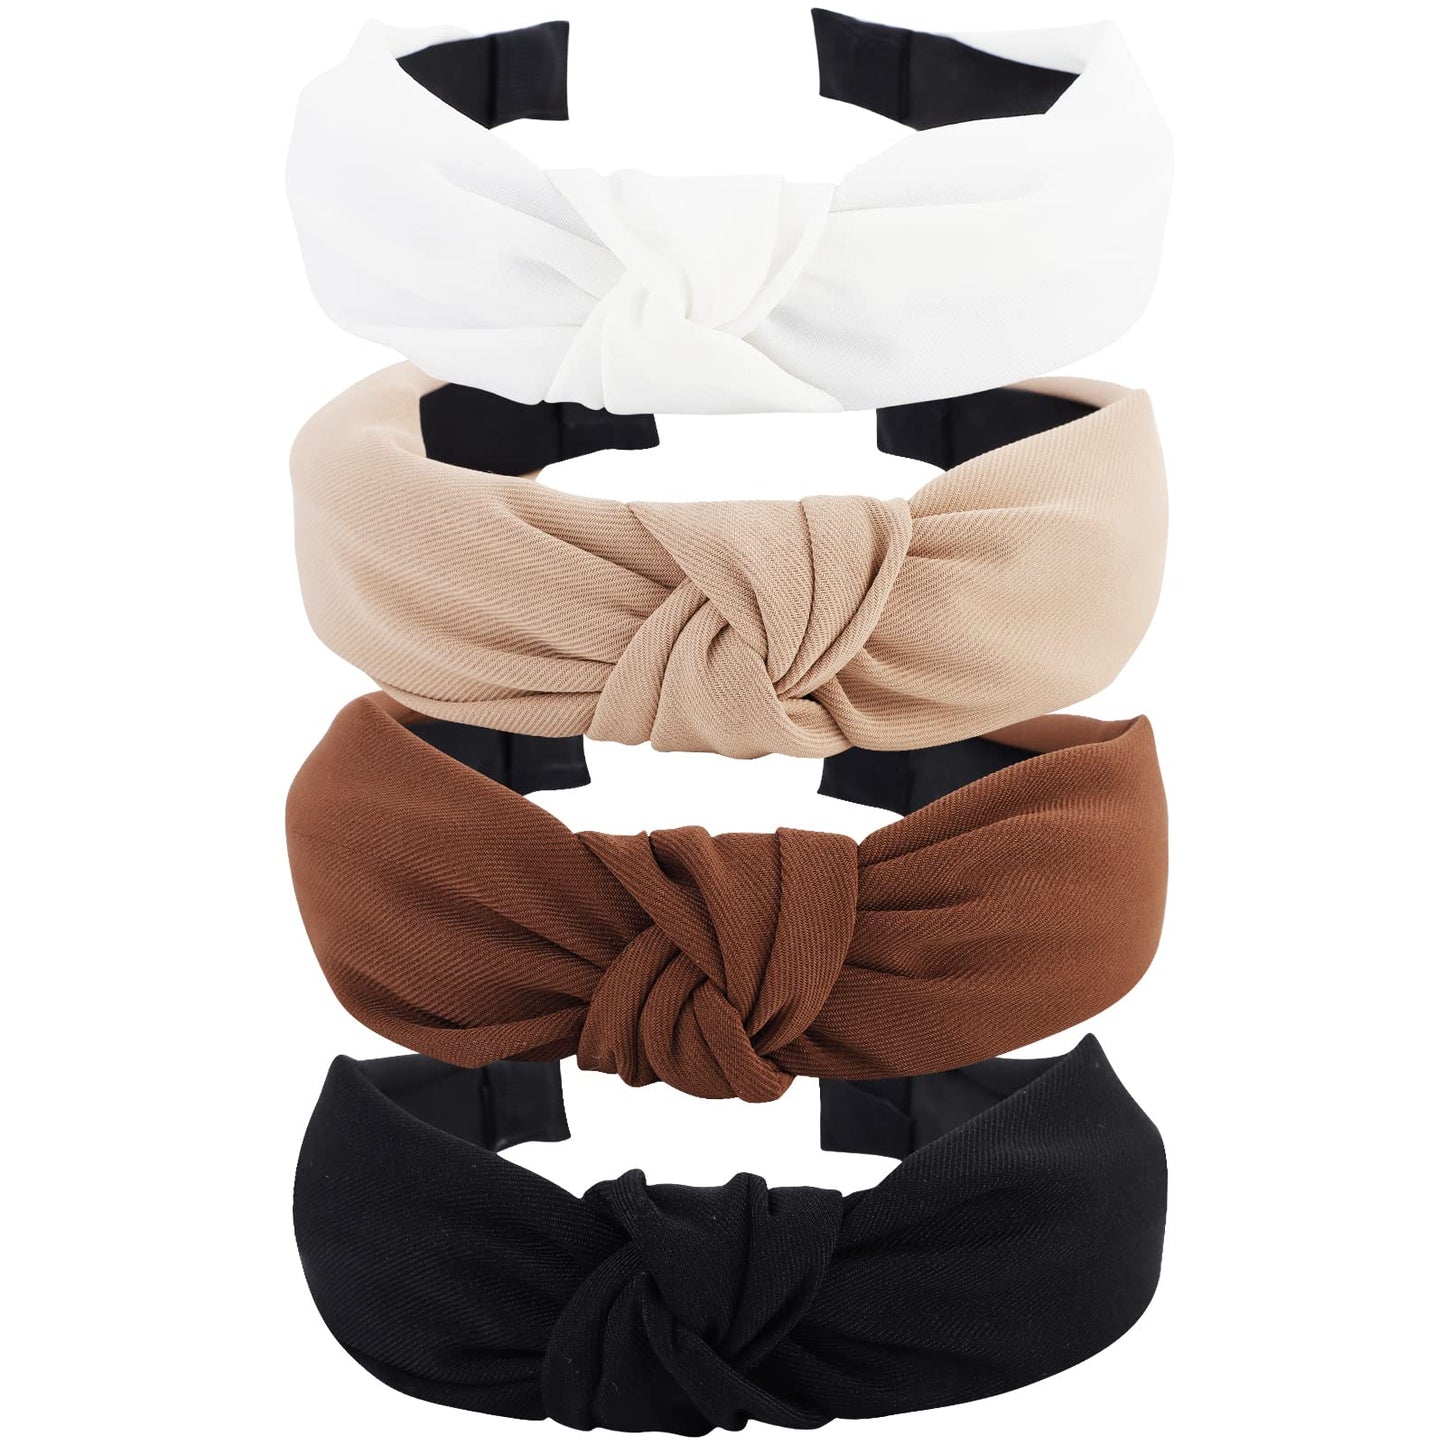 YISSION 4PCS Knotted Headbands - Non Slip Wide Fashion Head Bands for Women and Girls - Black and White Top Knot Accessories